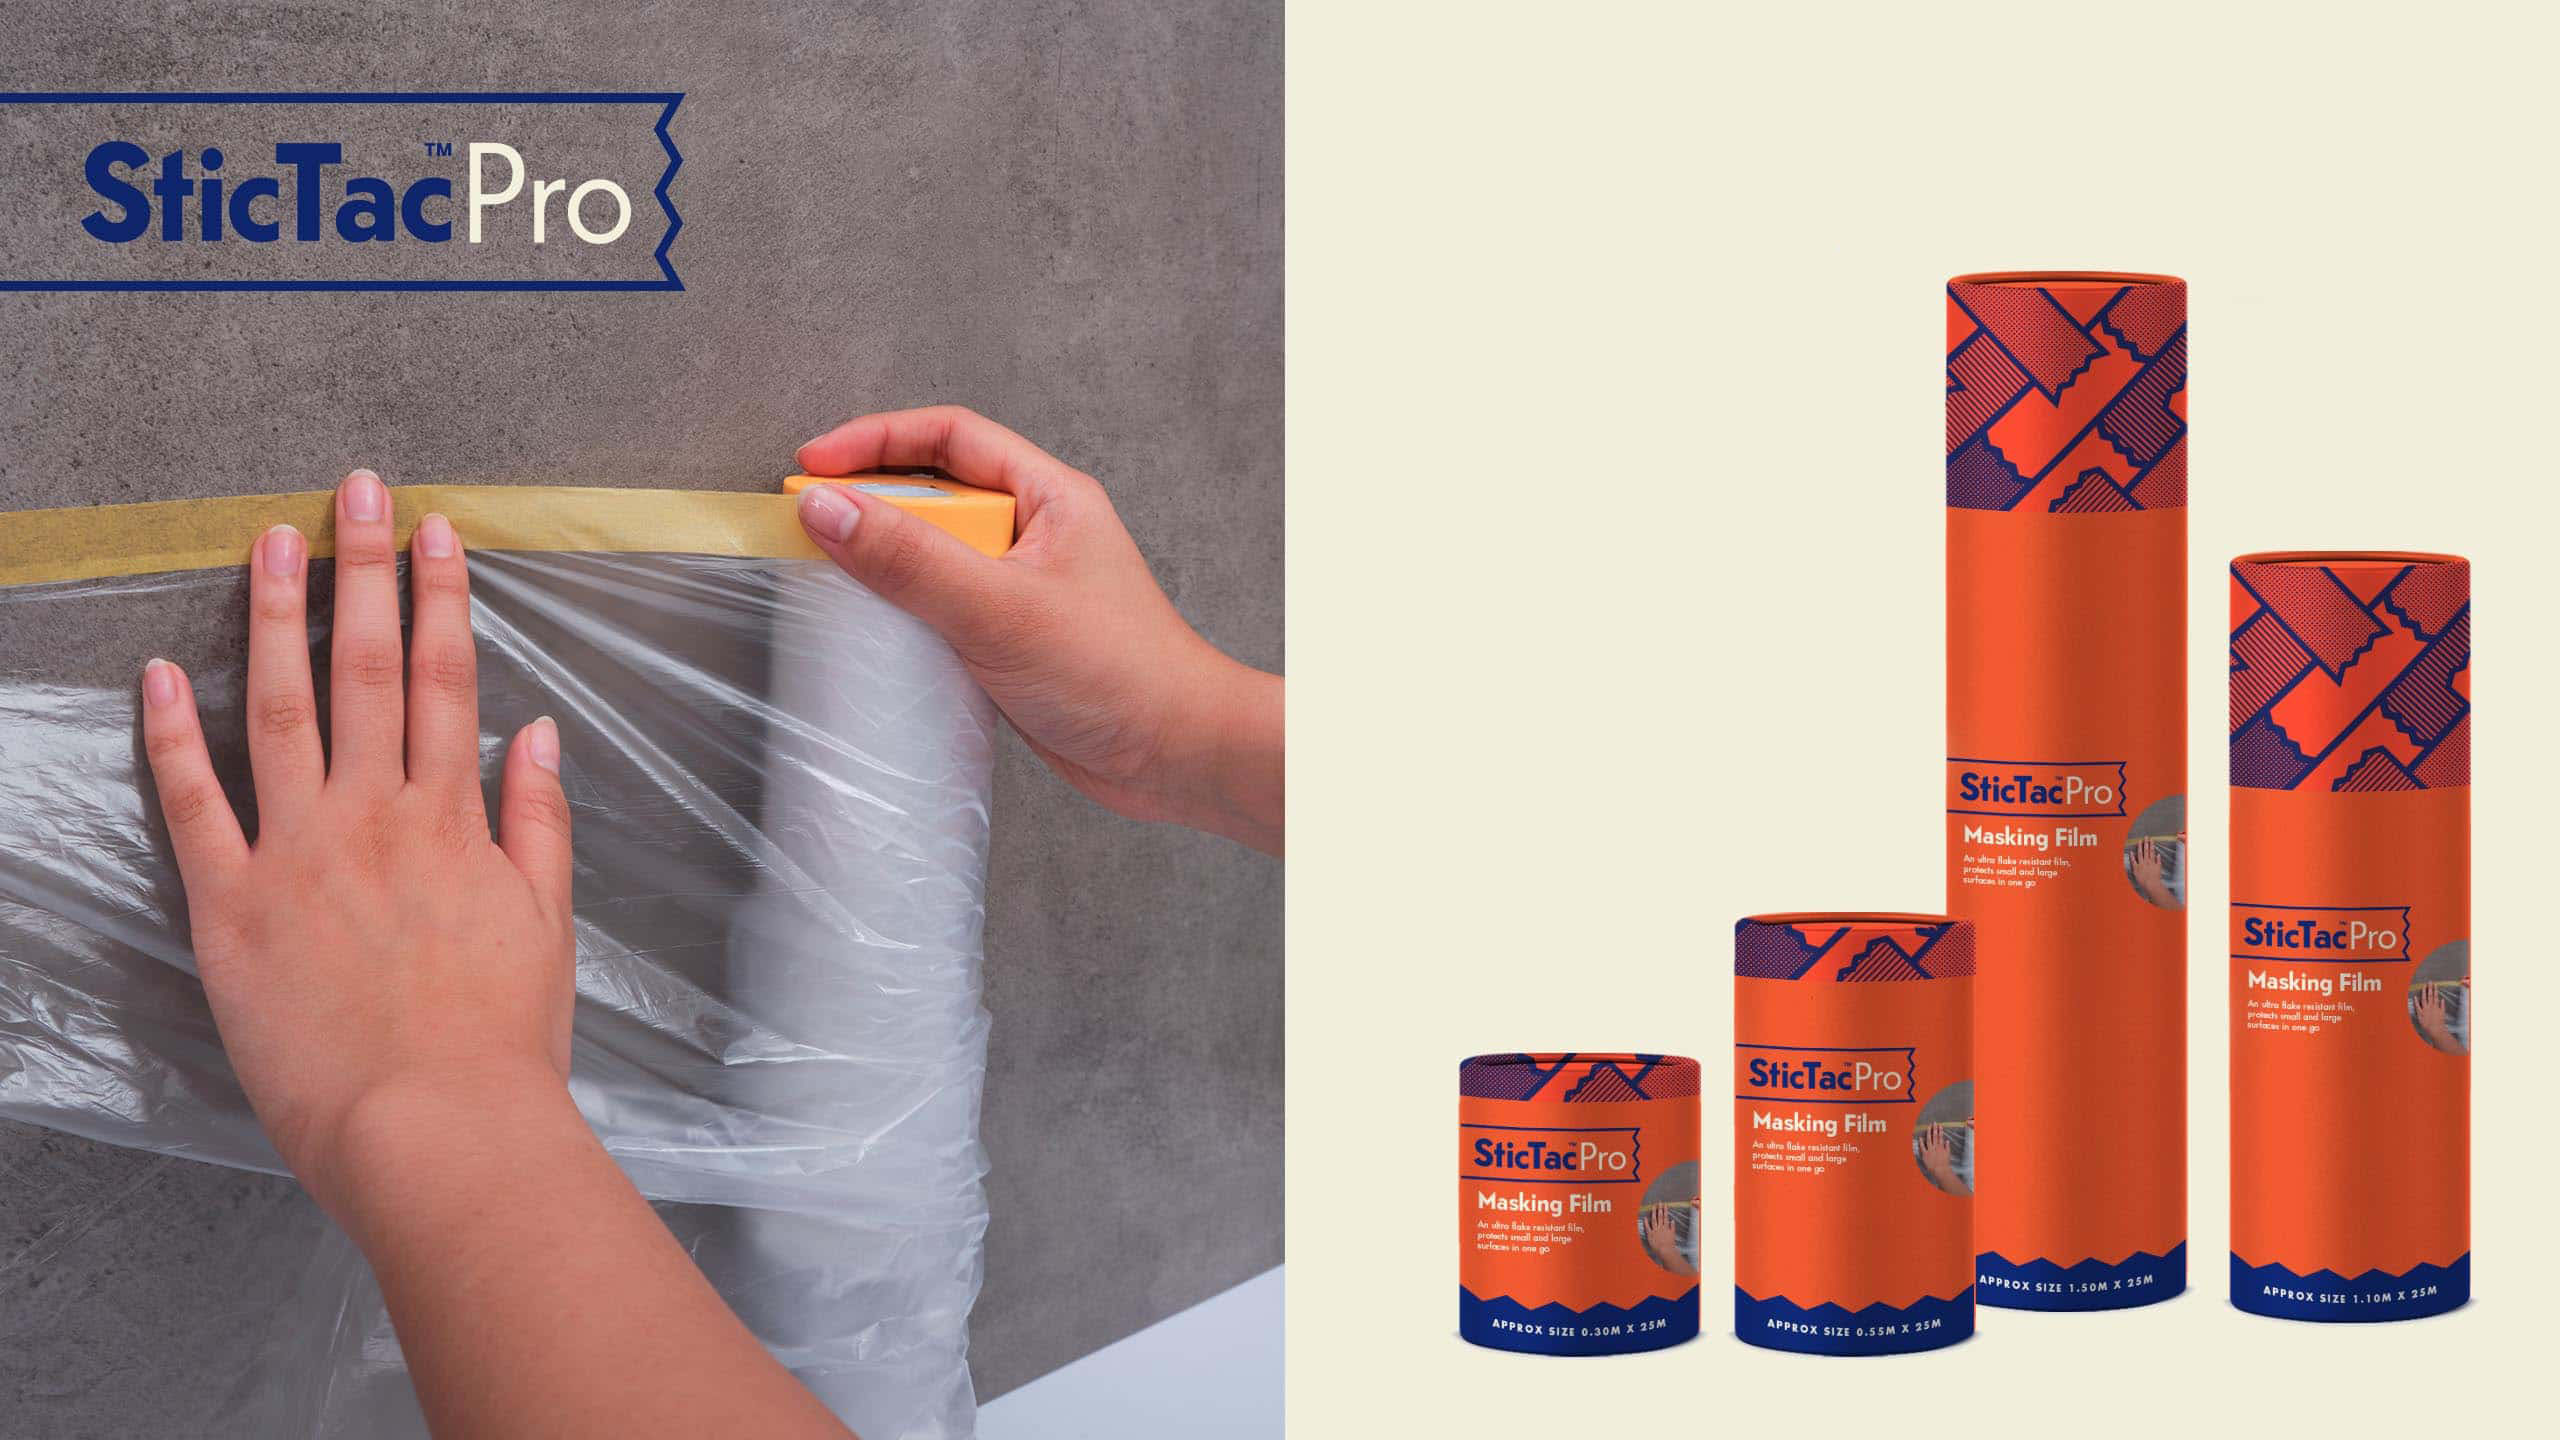 Packaging and product photo for SticTac Pro's masking film